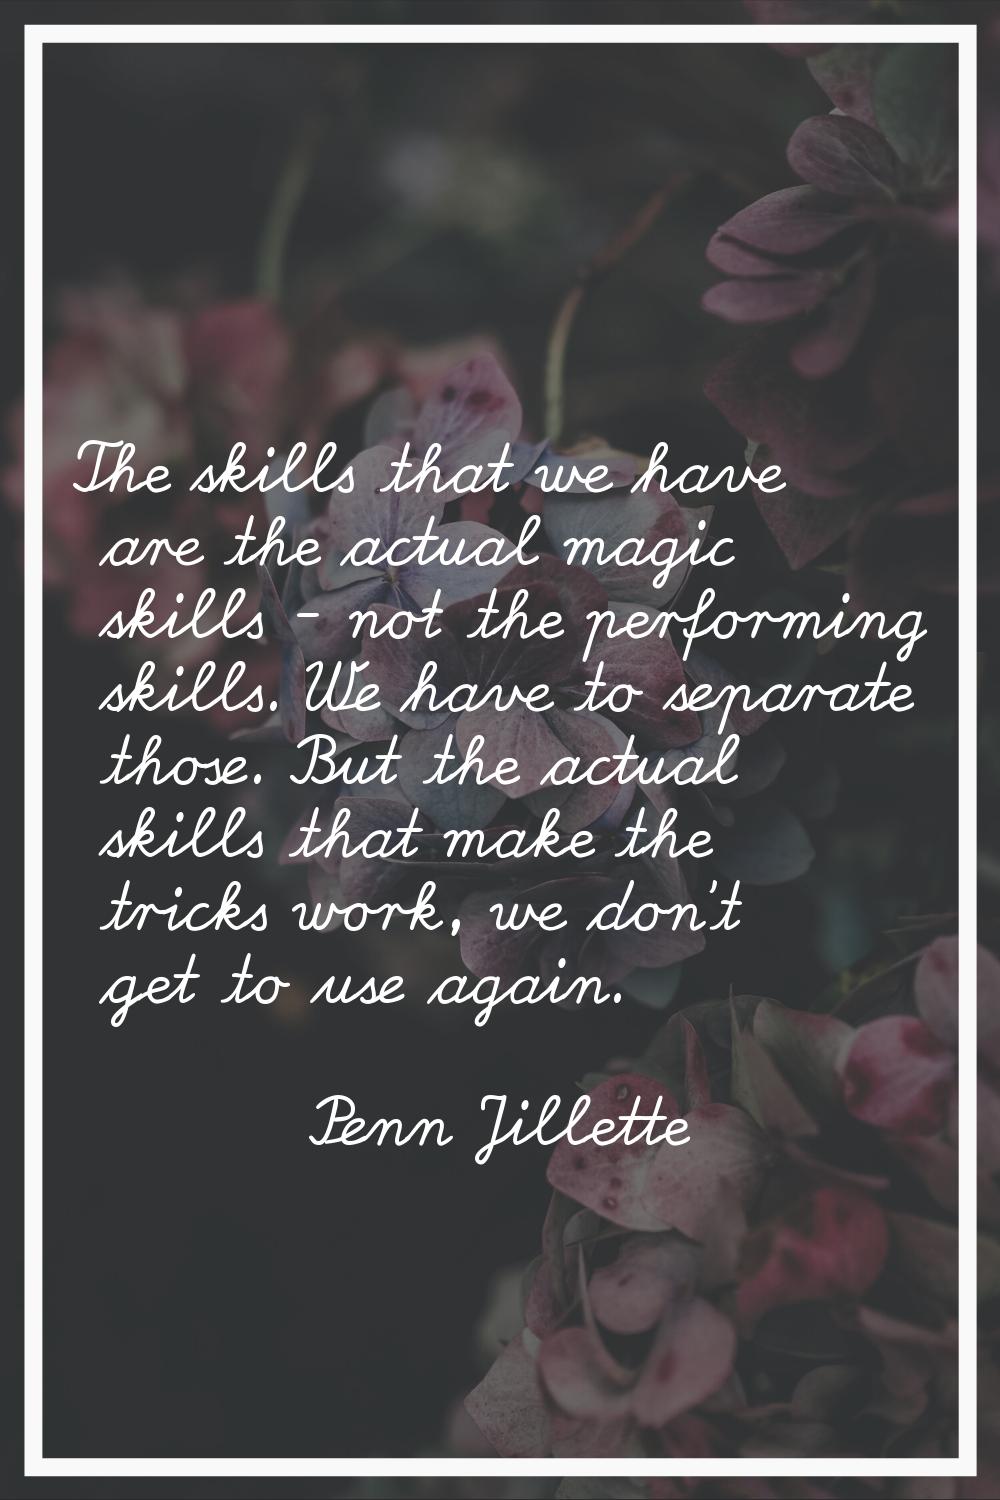 The skills that we have are the actual magic skills - not the performing skills. We have to separat